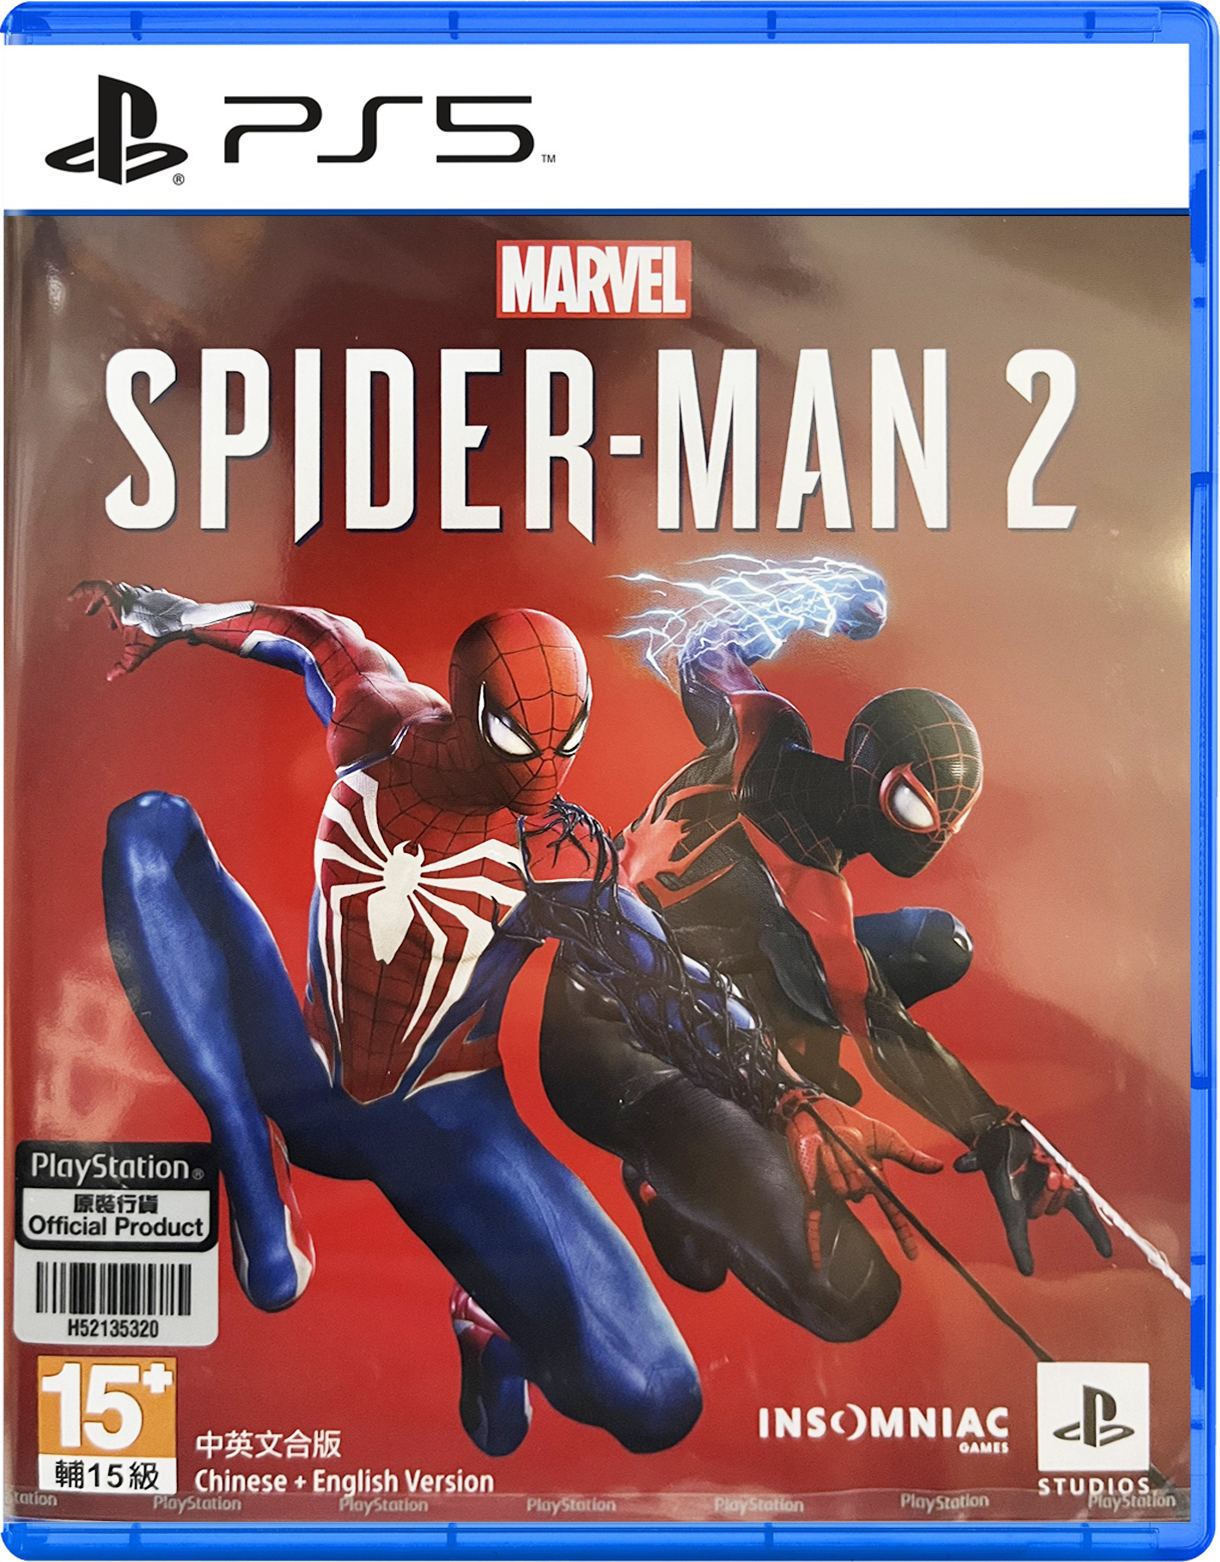 NEW PS5 Marvel's Spider-Man Spiderman 2 (HK, English/ Chinese) +